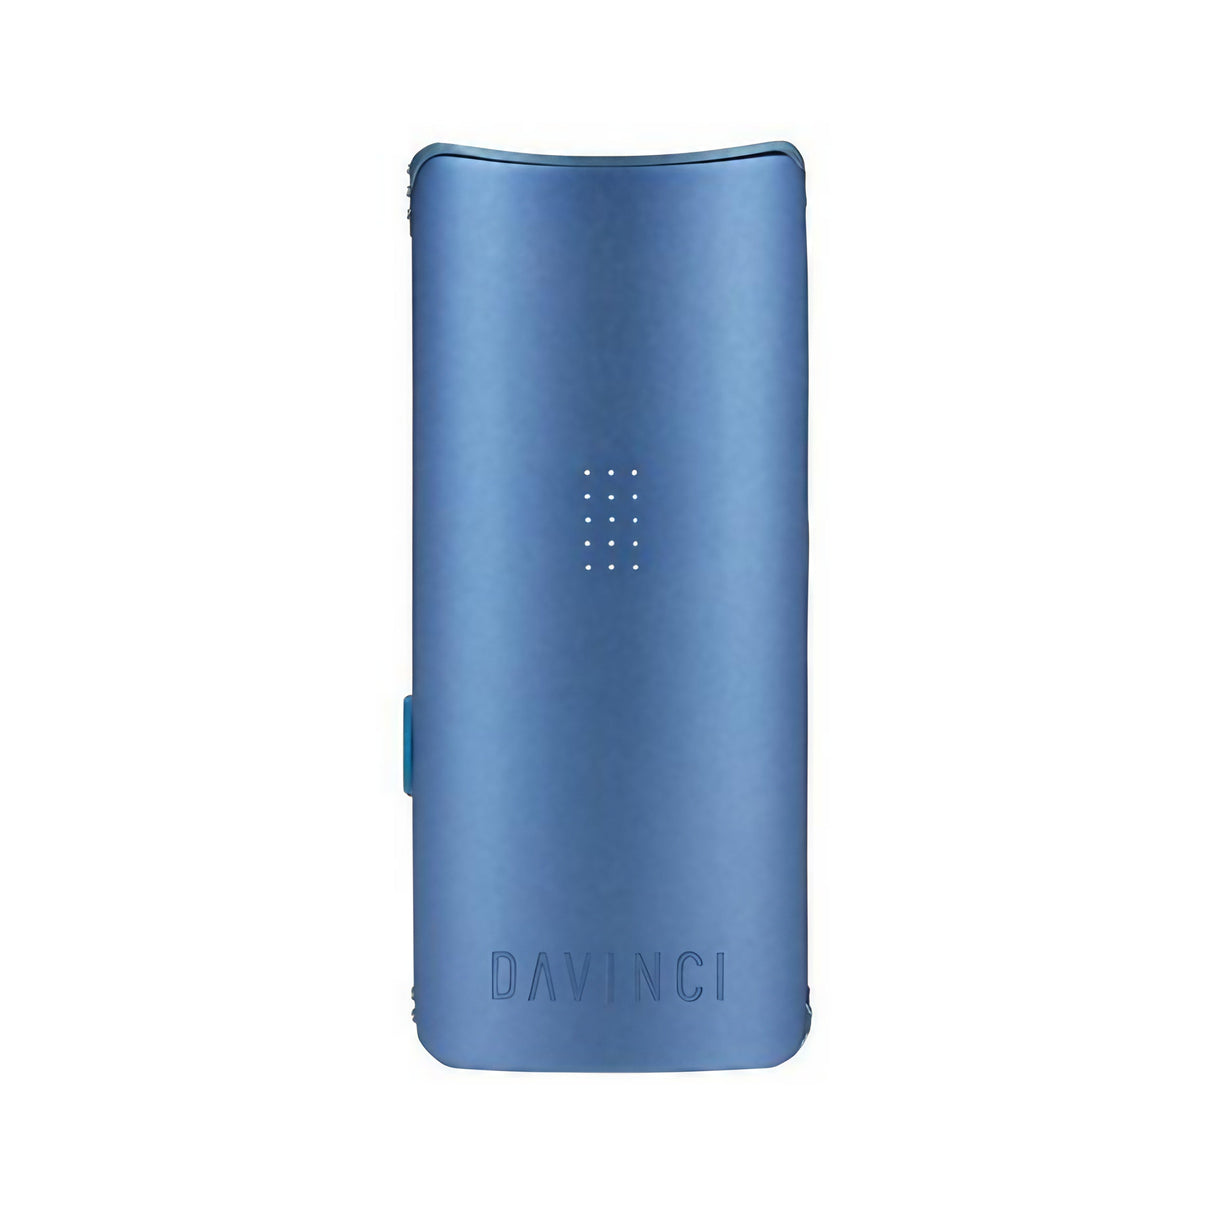 DaVinci MIQRO Vaporizer in blue, compact ceramic design, battery-powered for dry herbs